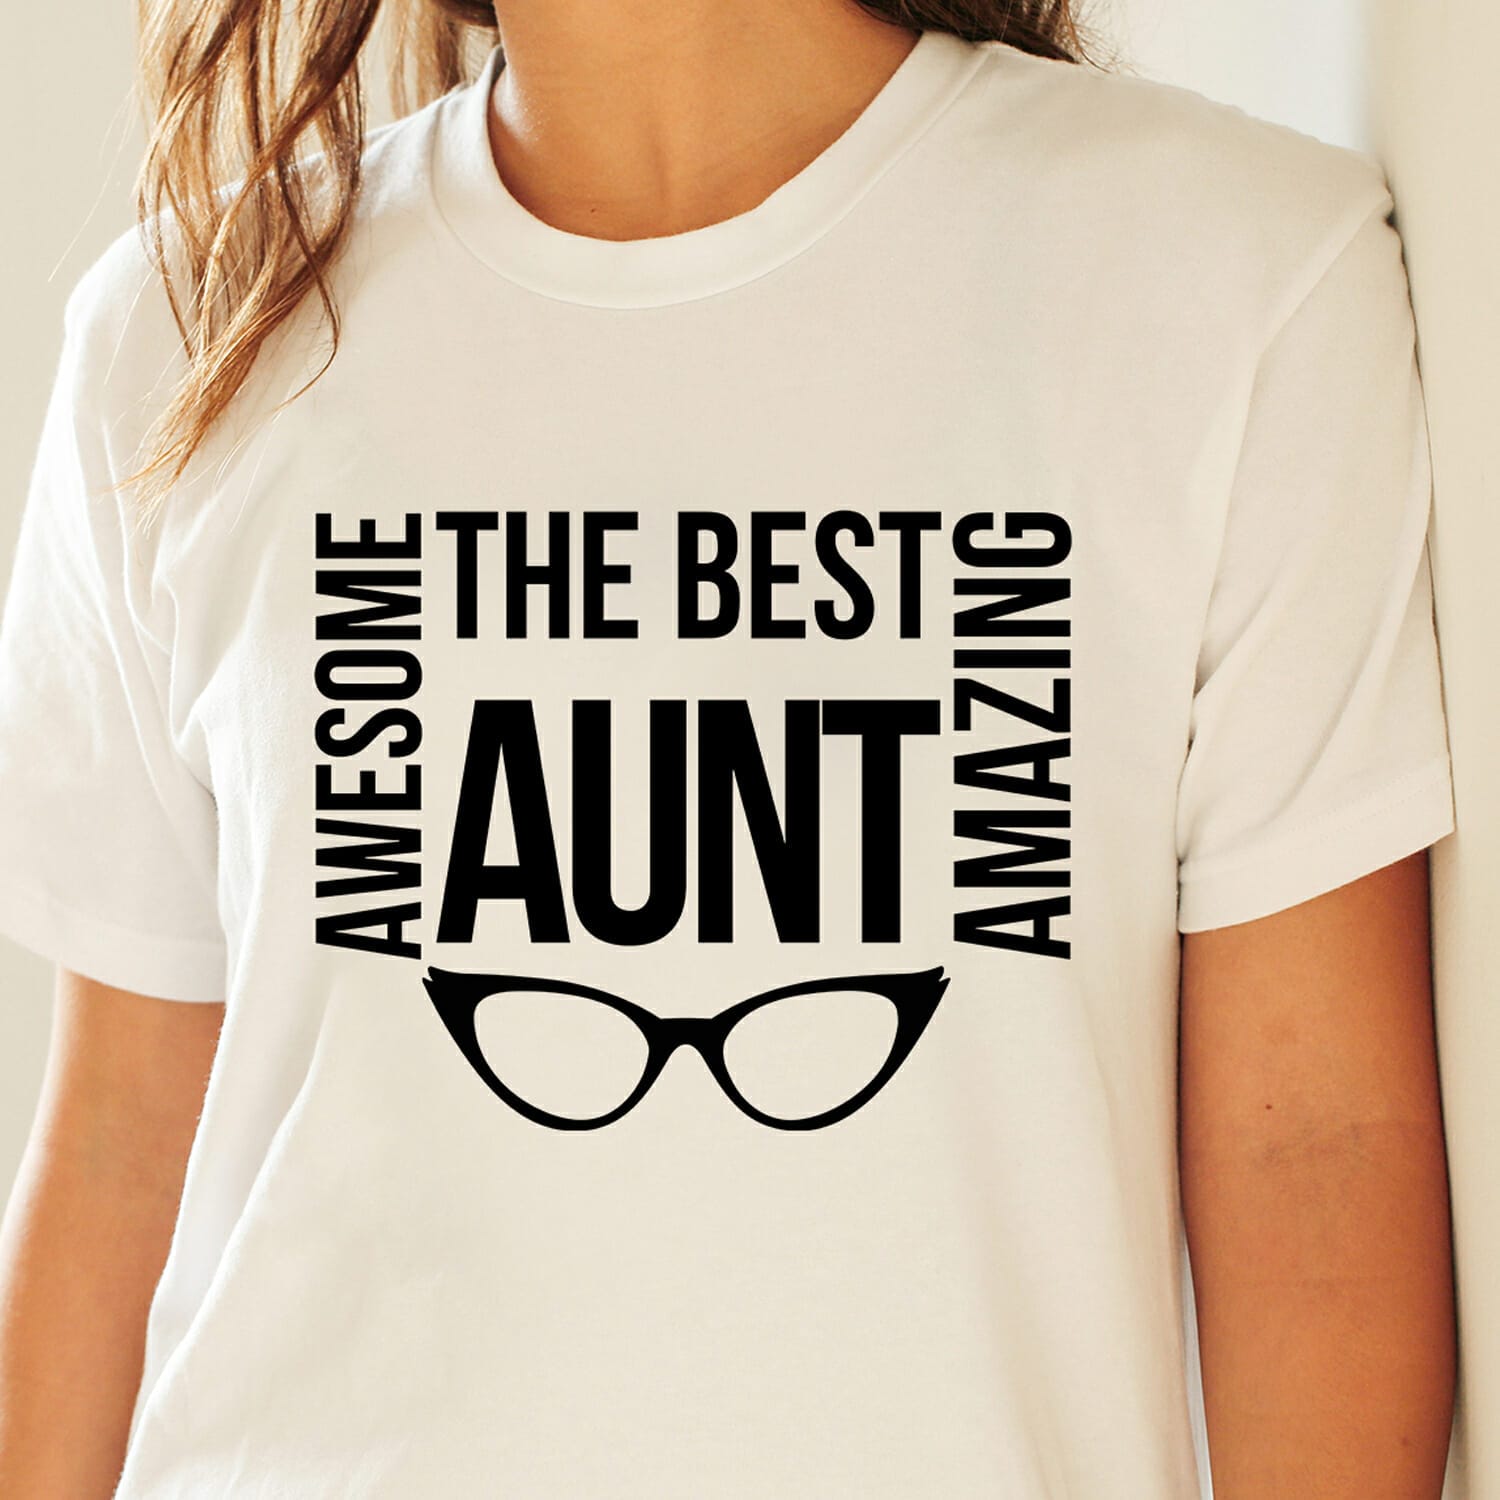 The Best Awesome Aunt T-shirt Design